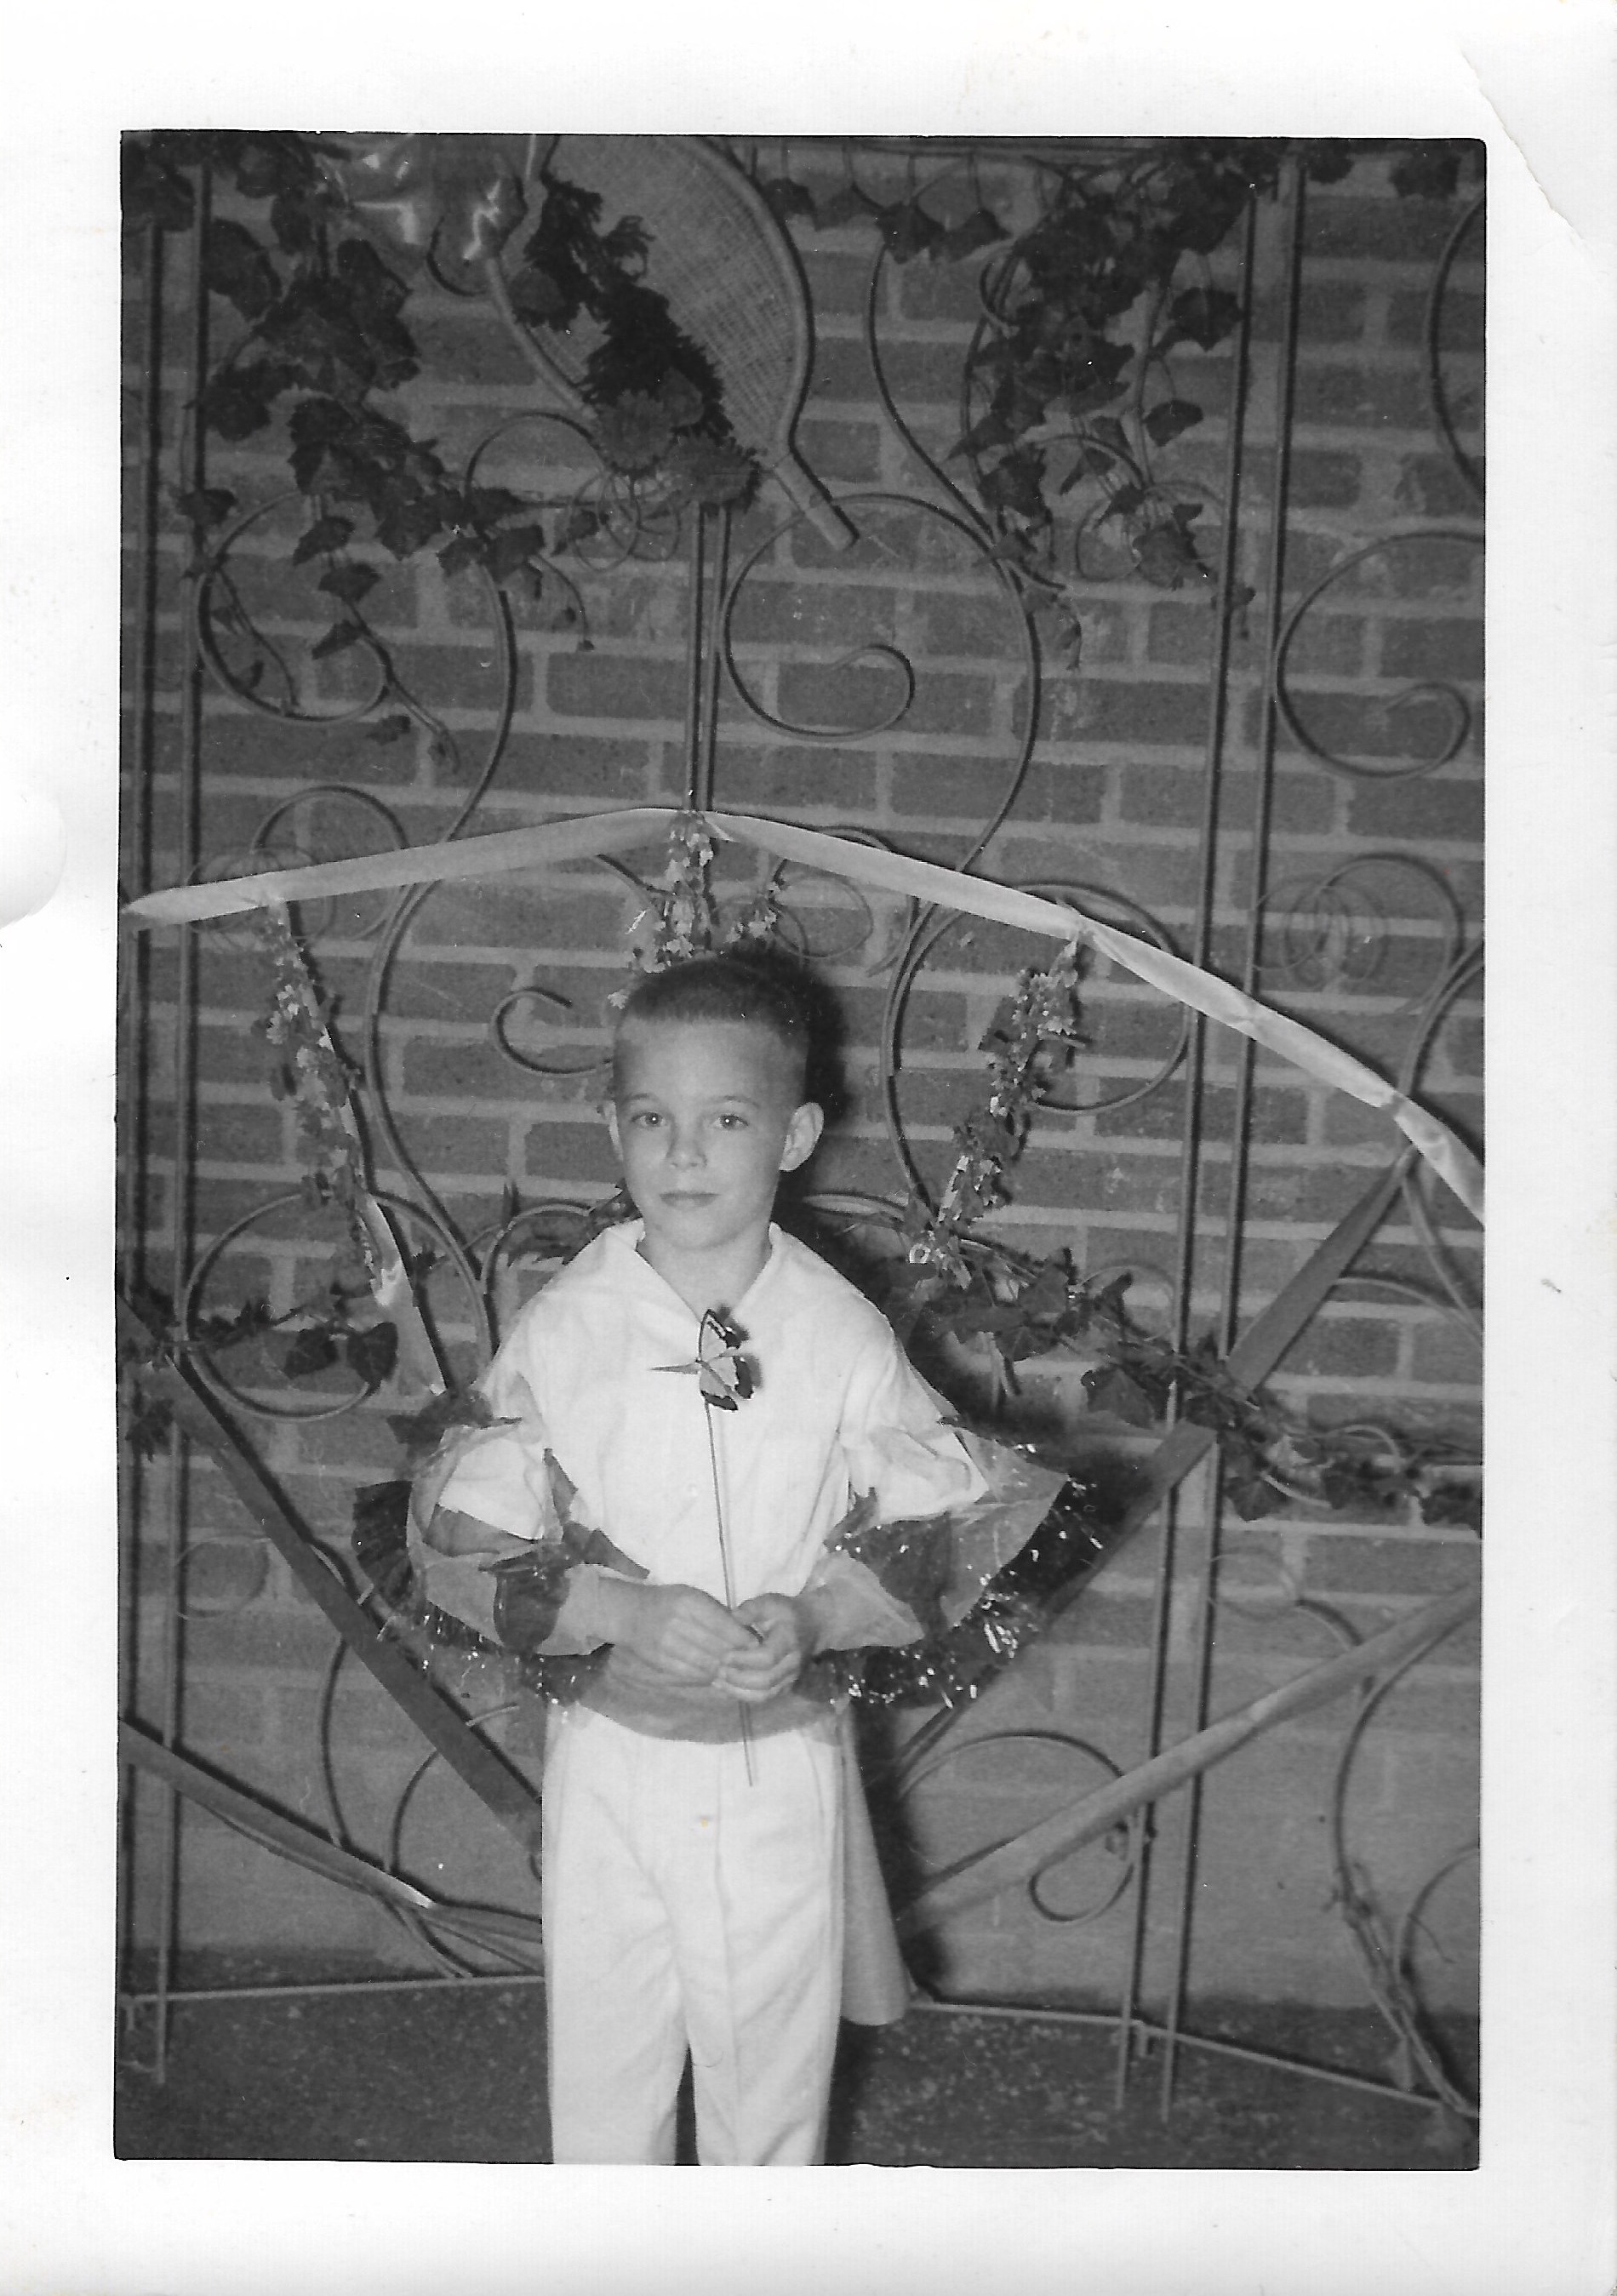 Rags in his kindergarten mambo outfit with cellophane ruffles, McComb, MS, circa 1954.